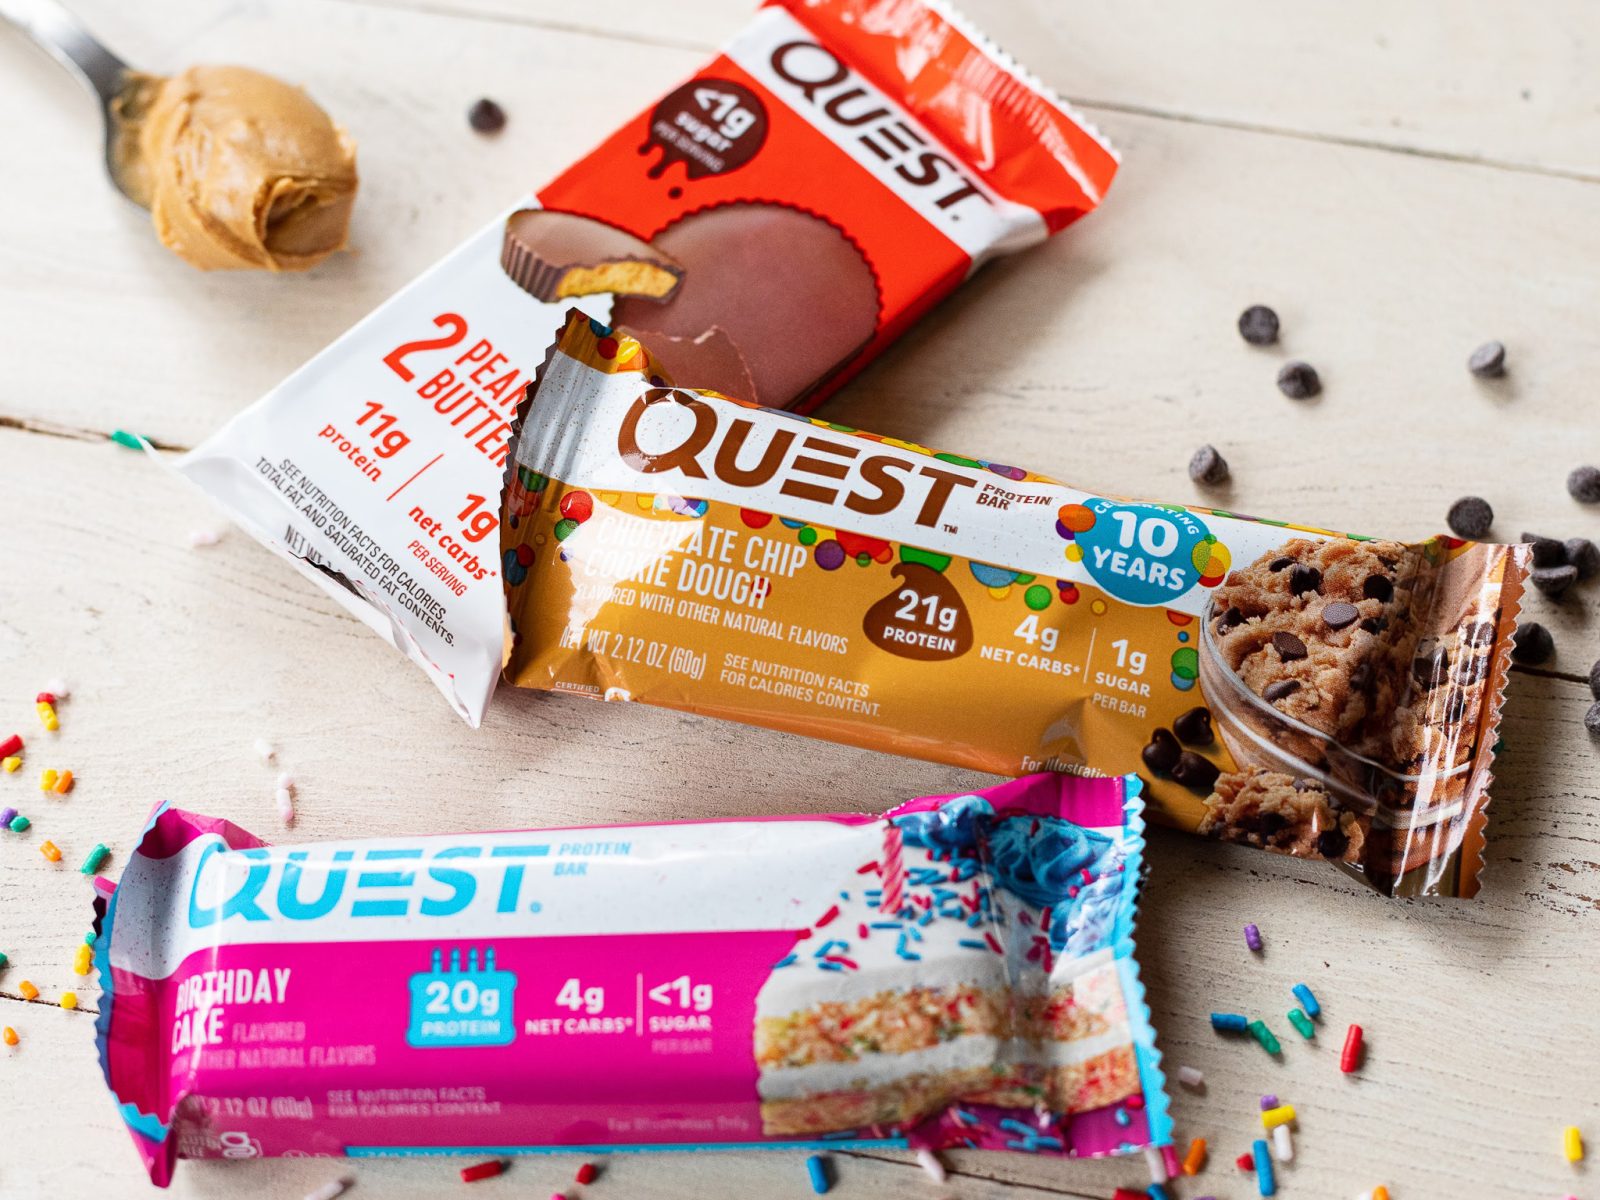 Quest Protein Bars As Low As $1.19 At Kroger – Plus Cheap Quest Protein Cookies